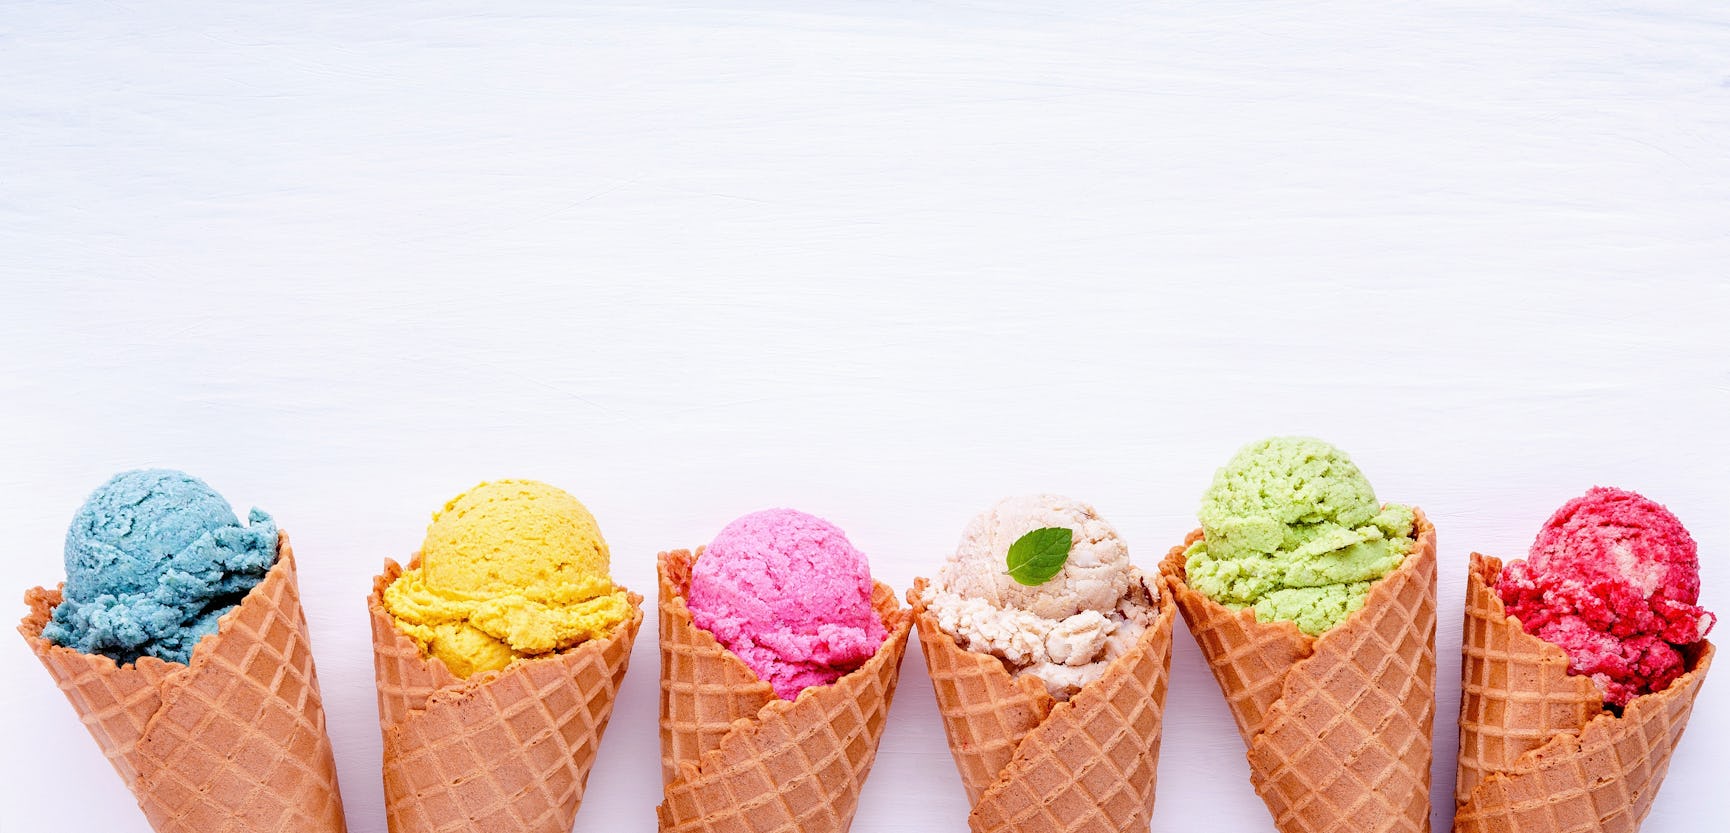 Six different flavours of ice cream